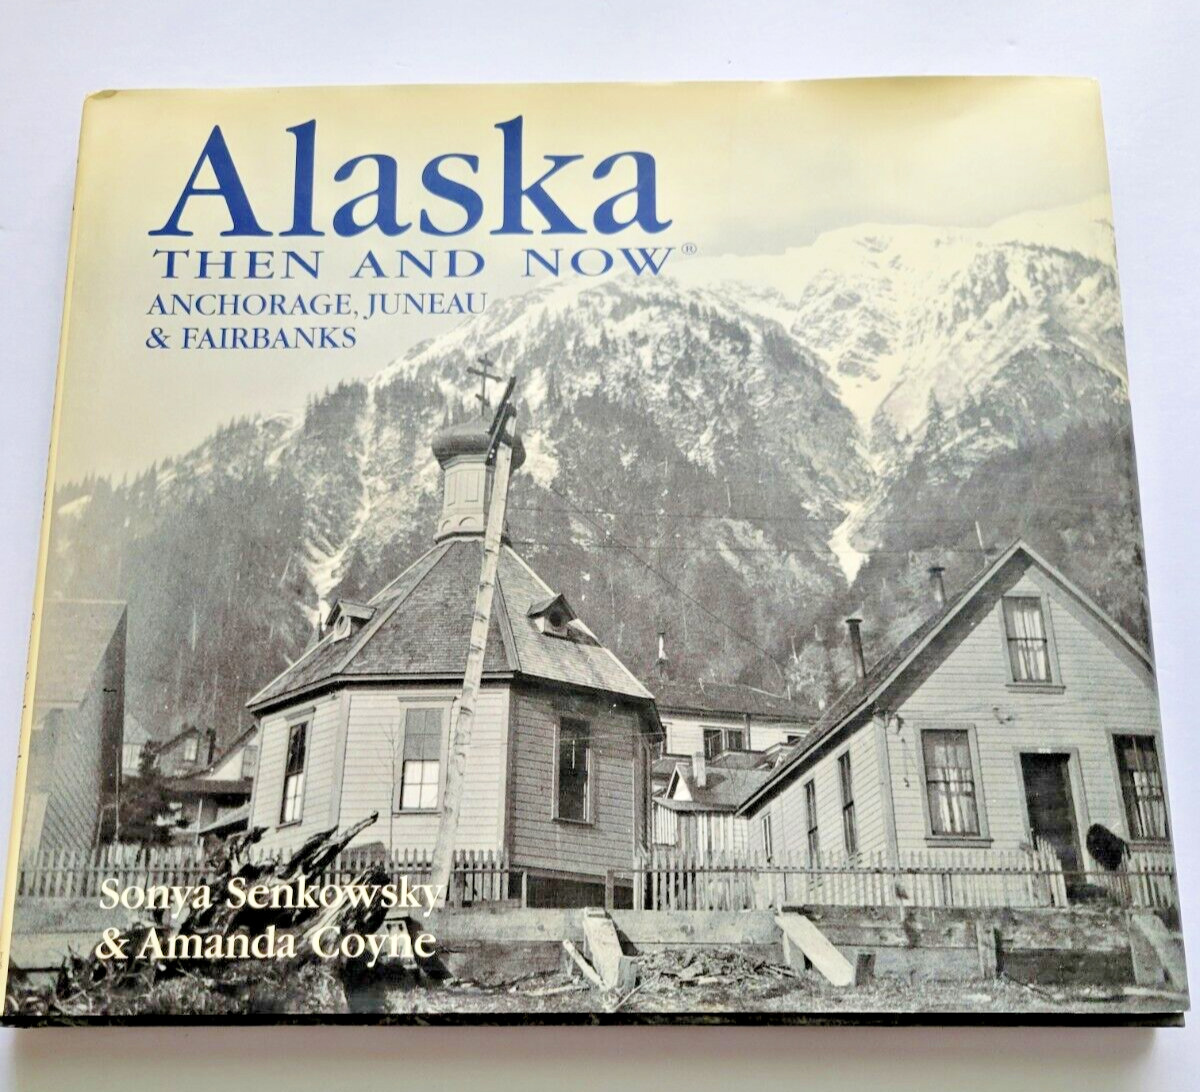 Alaska Then and Now Anchorage Juneau & Fairbanks Nice Hardcover Coffee TableBook